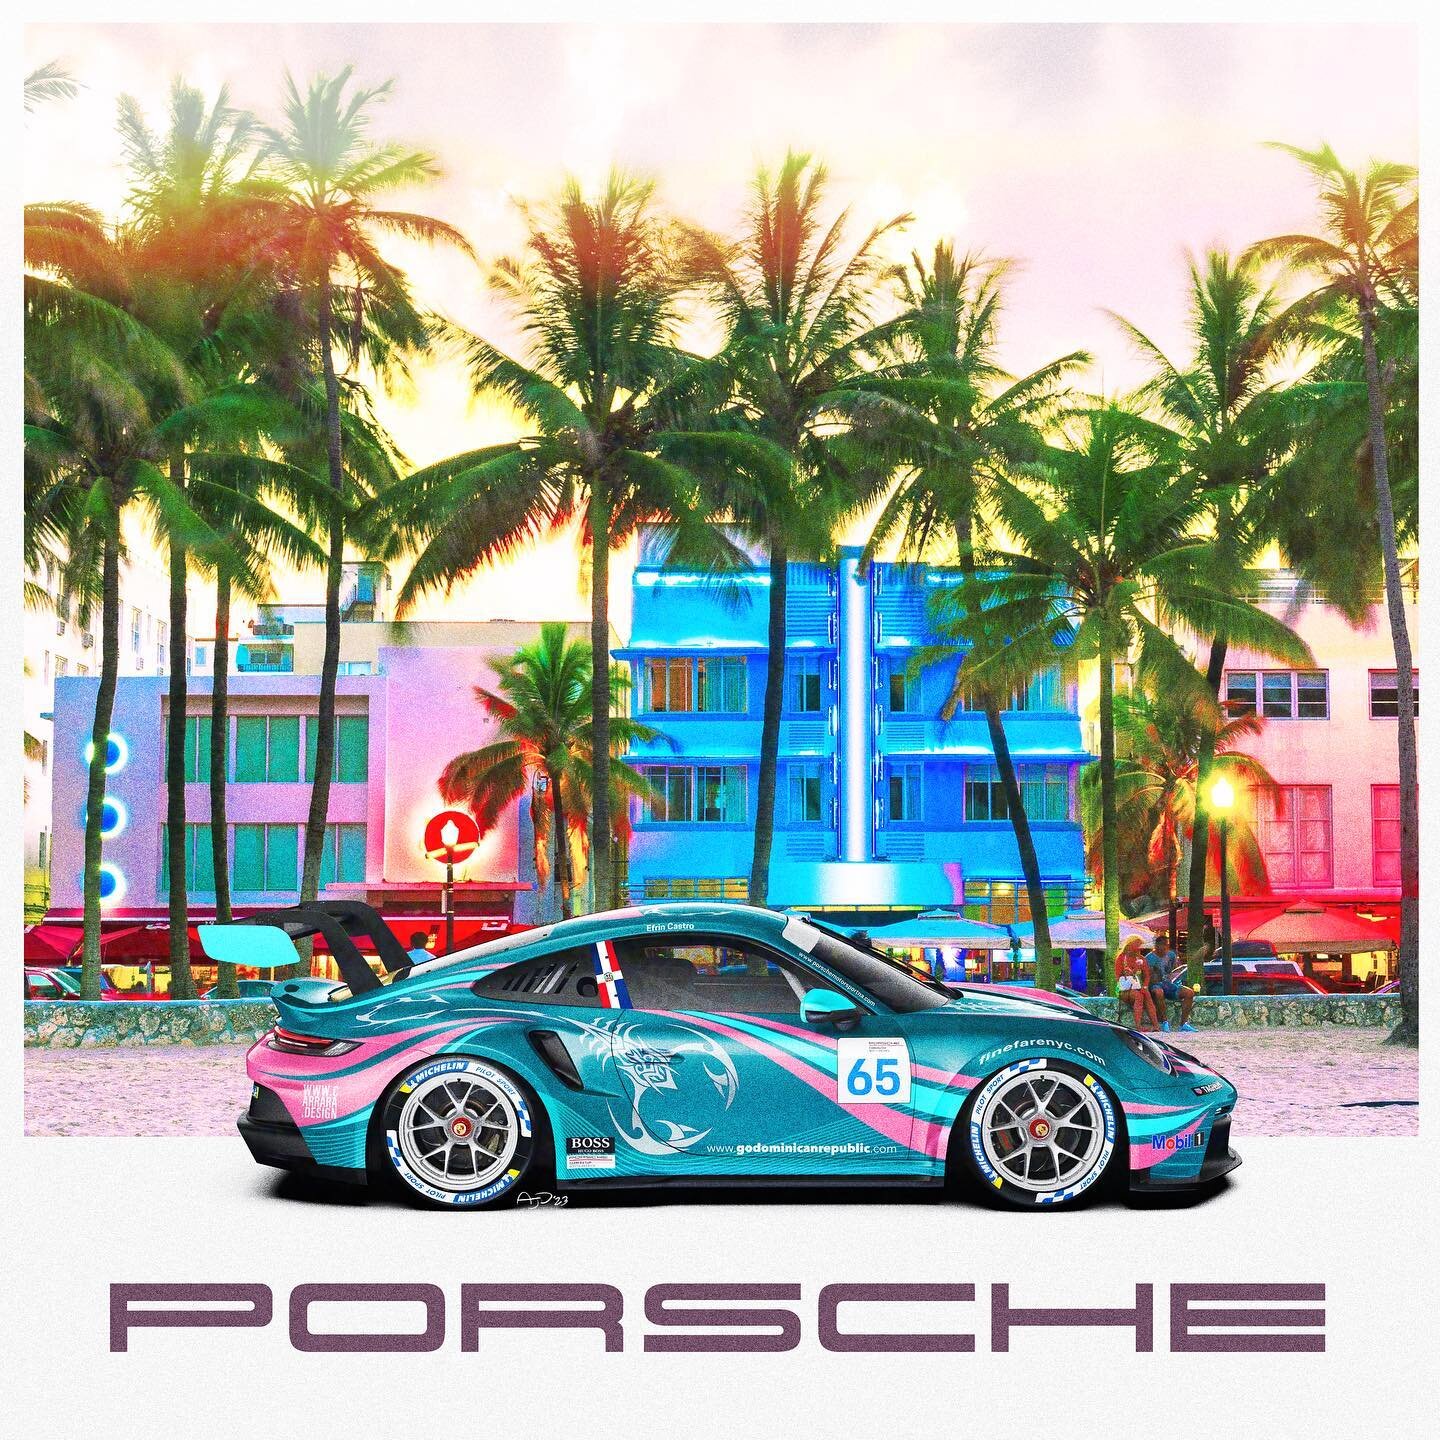 Who will be here for the @f1mia? We&rsquo;re here to cheer on @991gt3 for the #PCCNA races but I suppose #F1 will be a nice side show. 😆 First practice in a few hours! 

Here is a another visual we created imagining Efrin&rsquo;s livery in a Miami t